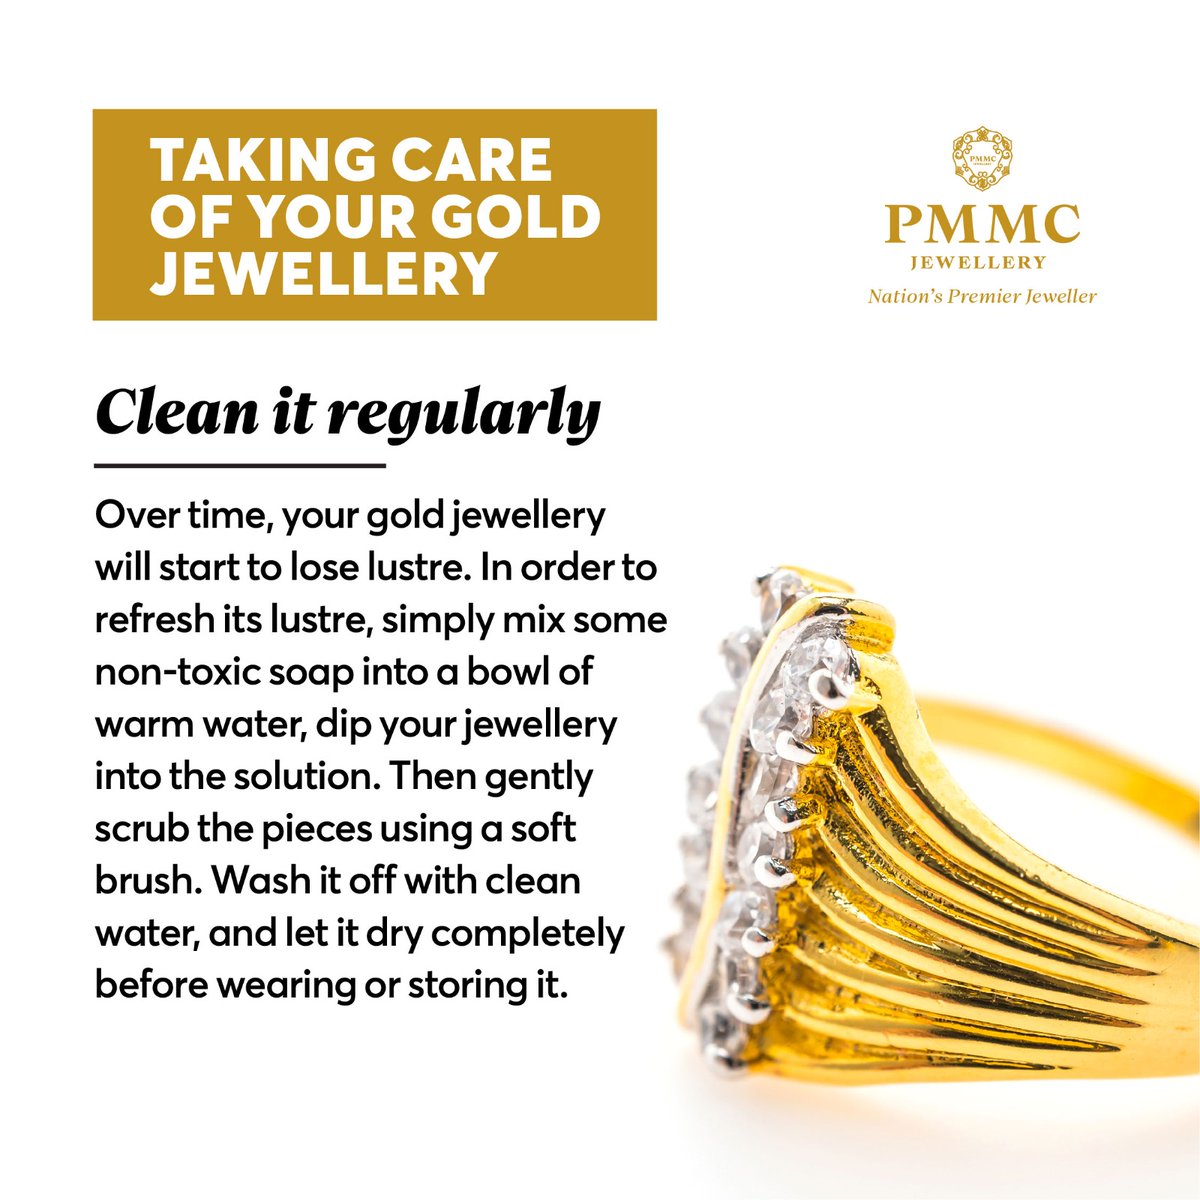 In order to refresh the lustre of your gold jewellery, clean it regularly with non-toxic soap and warm water.

#PMMCJewellery #NationsPremierJeweller #JewelleryCare #MakeThemLast